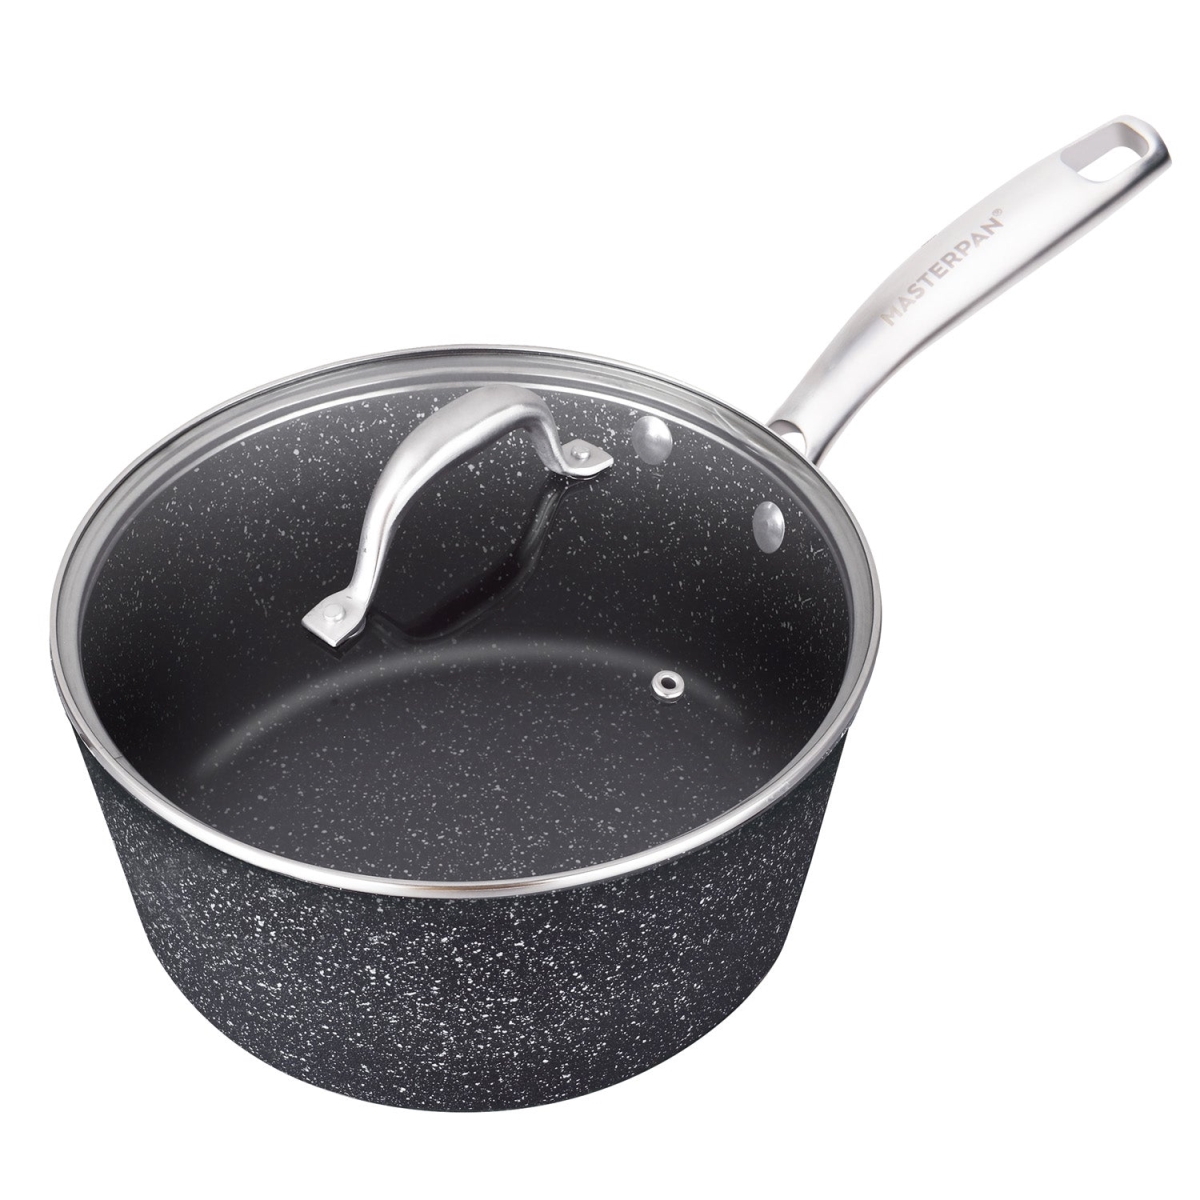 Picture of Masterpan MP-130 2 qt. x 7 in. Sauce Pan with Glass Lid Non-Stick Cast Aluminum Granite Look Finish